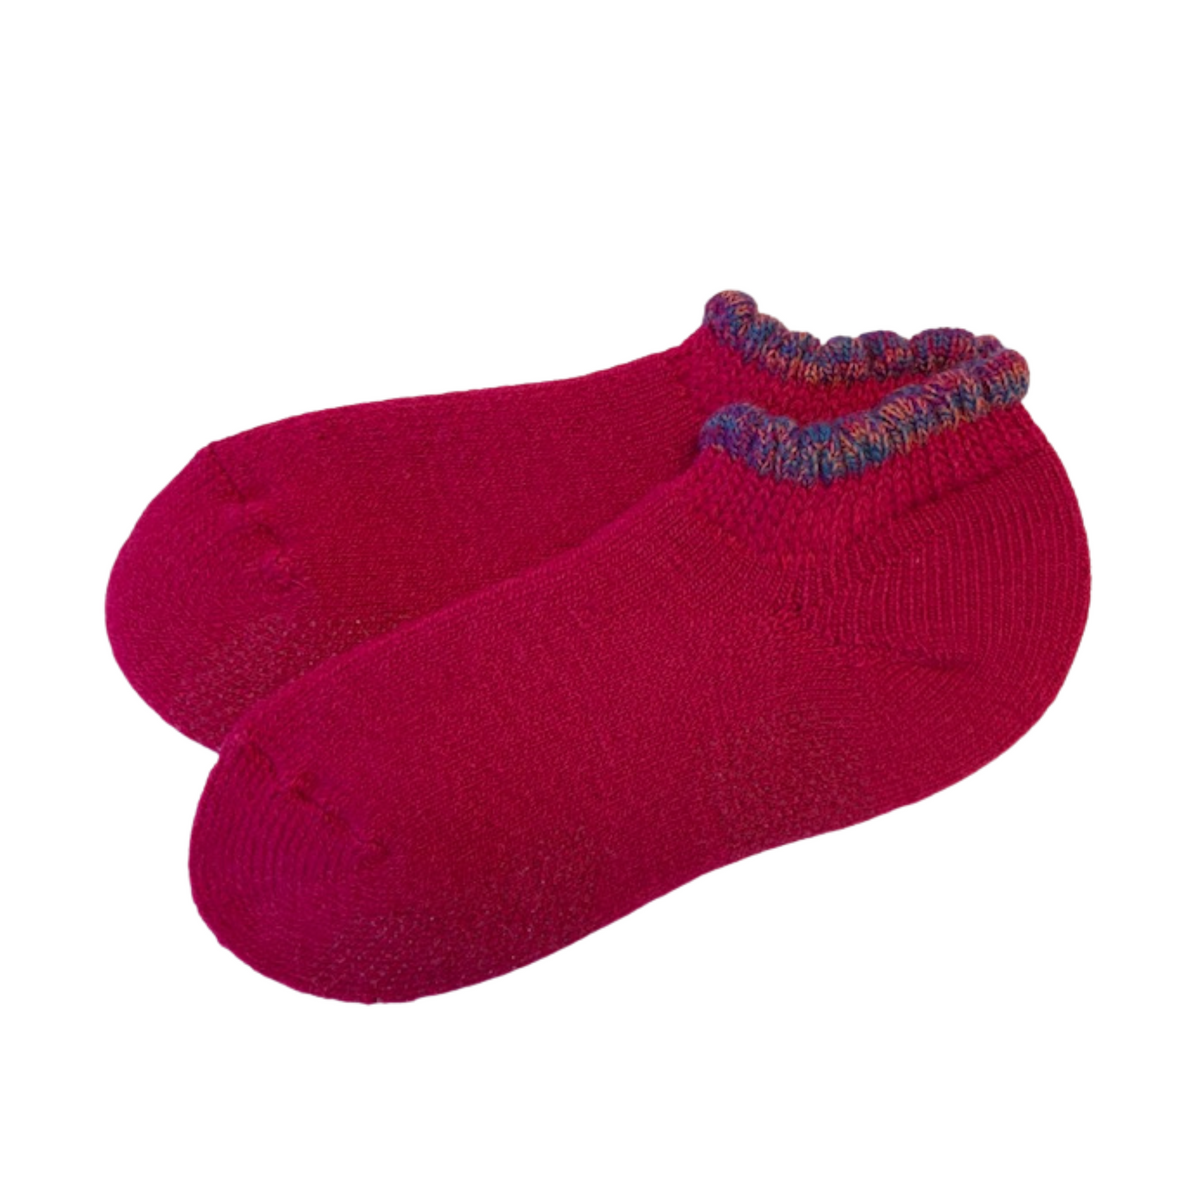 CHERRYSTONE® Thermal Wool Blend Slipper Socks with Grips | Size Medium | Deep Pink with Mixed Color Picot Trim - CHERRYSTONEstyle